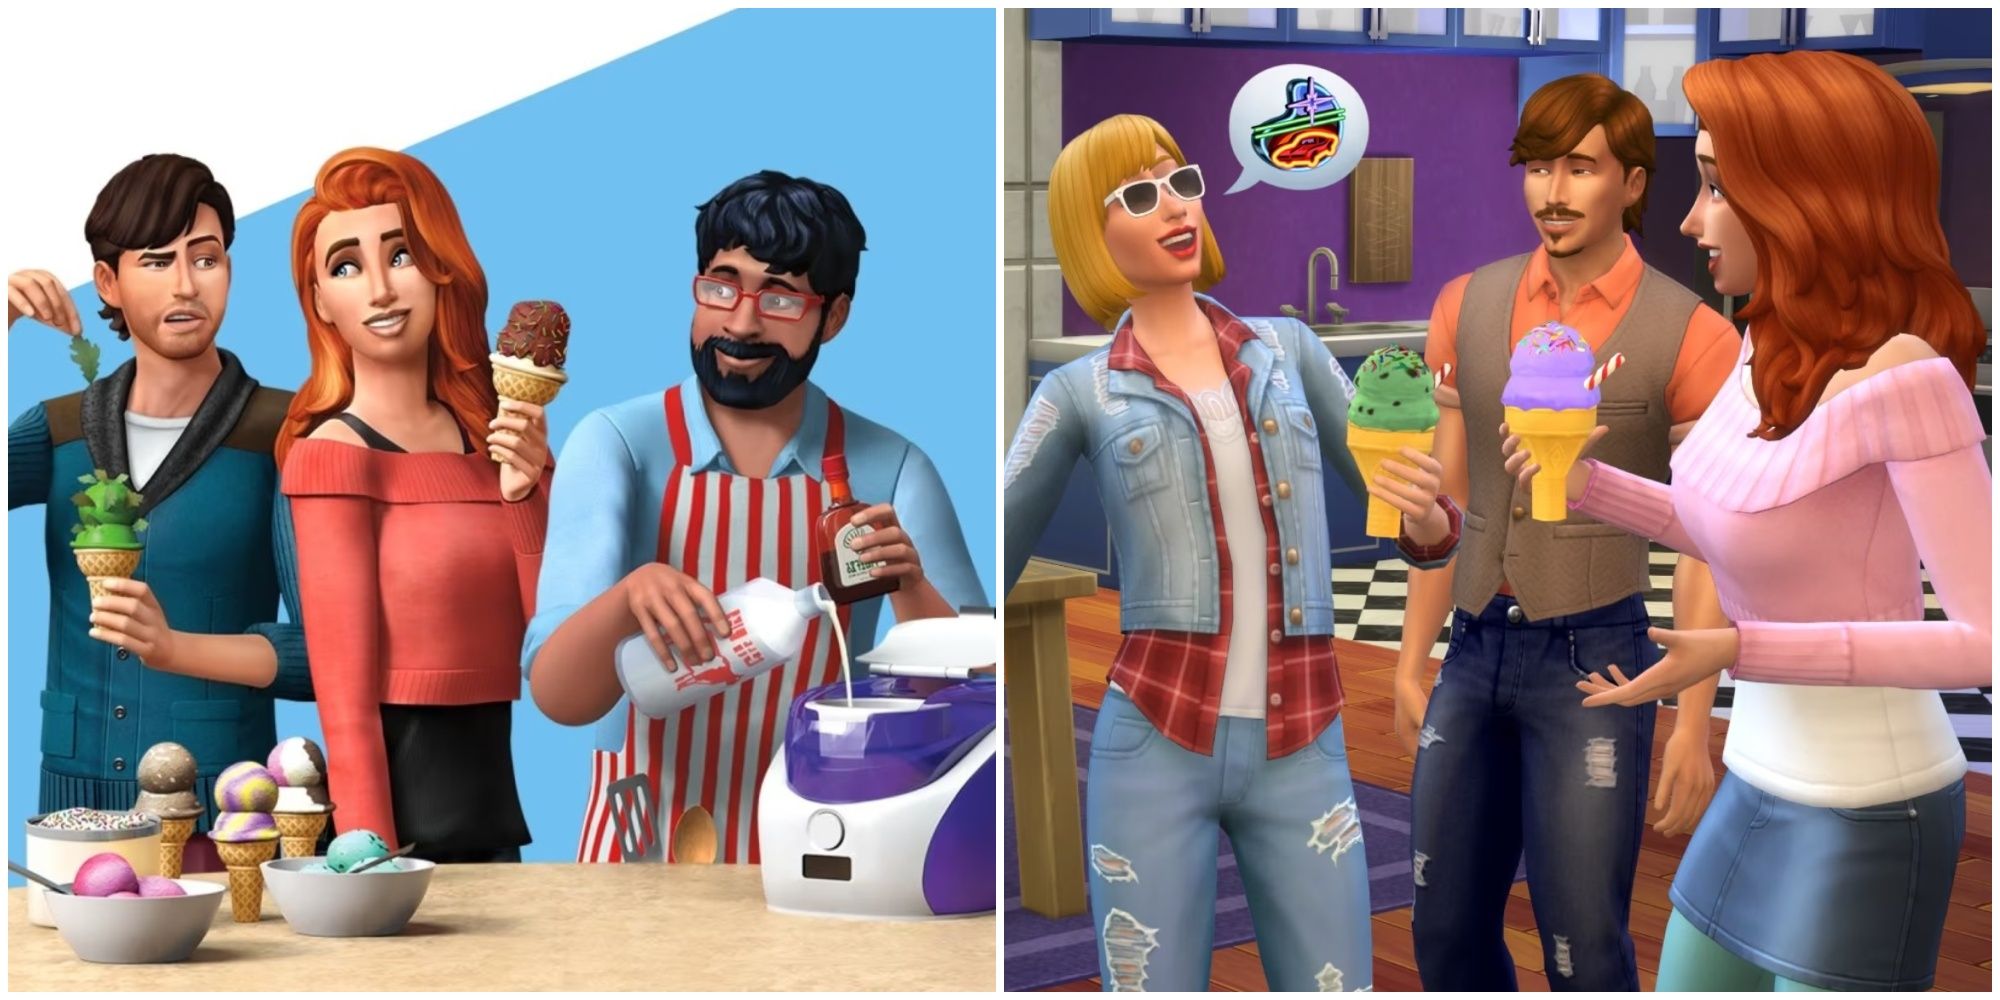 promo images for the cool kitchen stuff pack